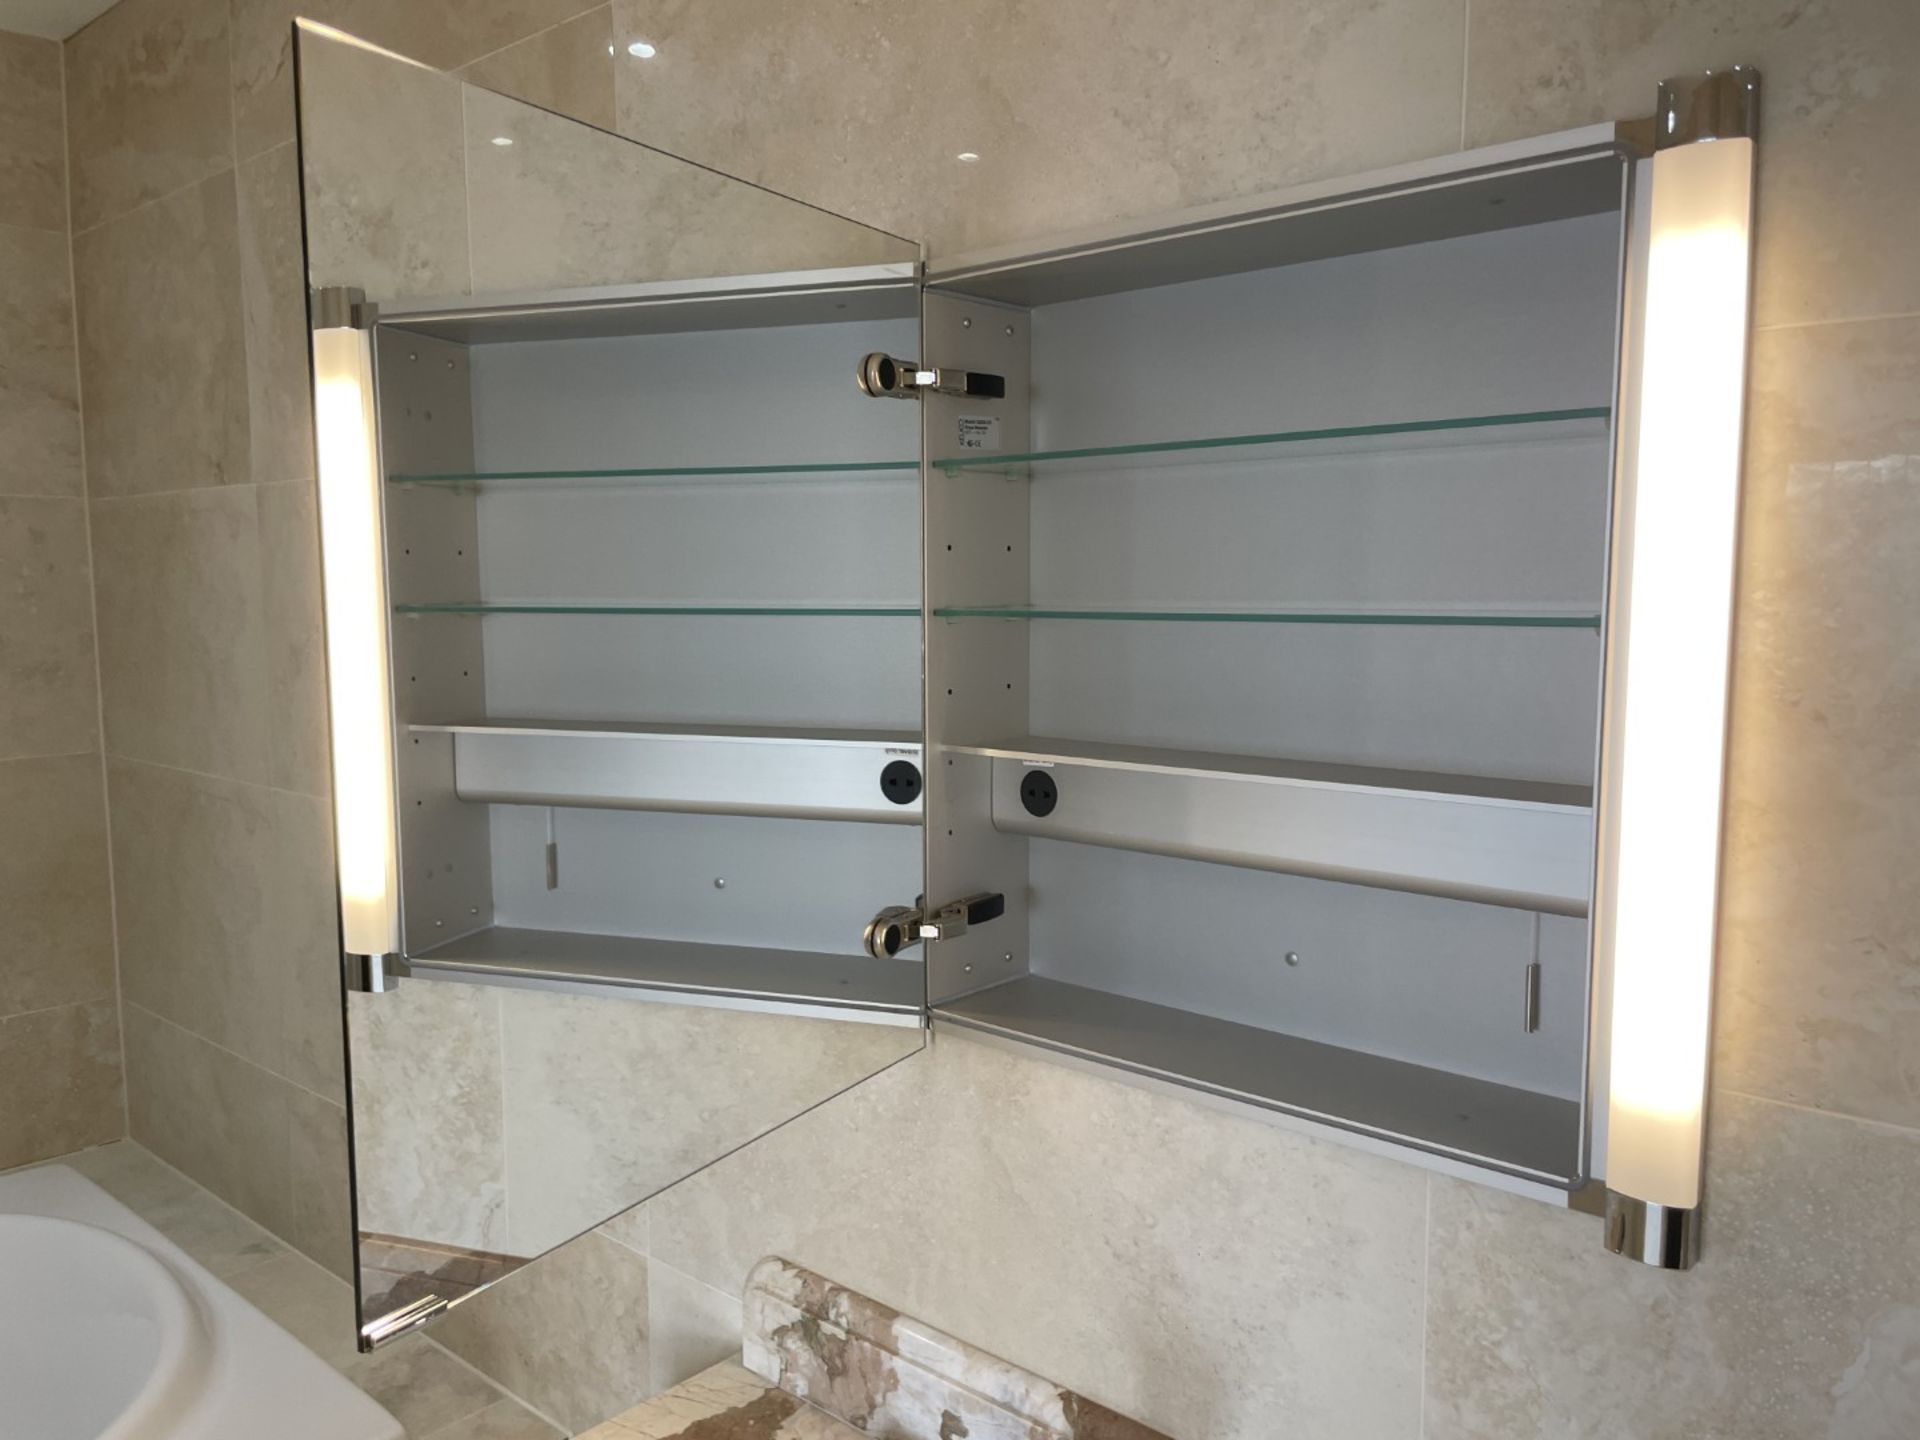 2 x KEUCO Illuminated Mirrored Wall Mounted Cabinets - Total Original Value: £2,000 - Ref: - Image 12 of 19